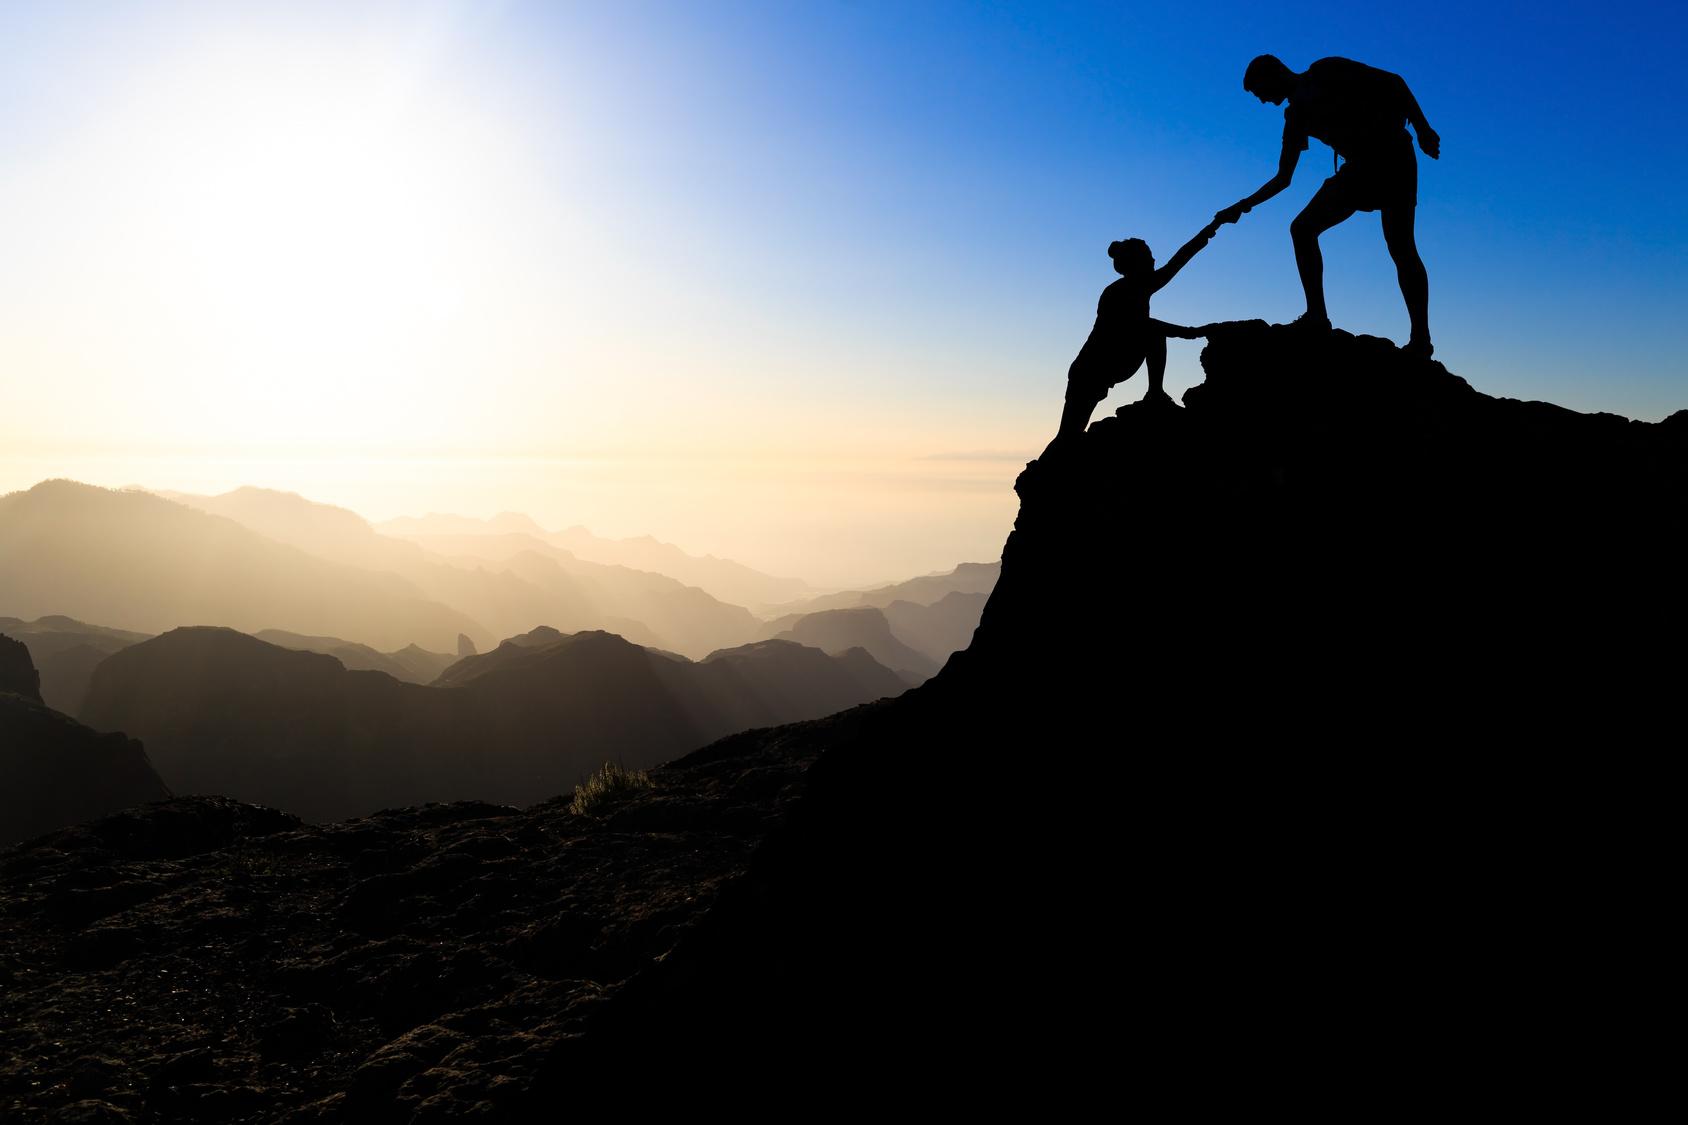 Teamwork couple hiking help each other trust assistance silhouette in mountains, sunset. Team of climbers man and woman hiker helping each other on top of mountain, climbing trust, beautiful sunset landscape.